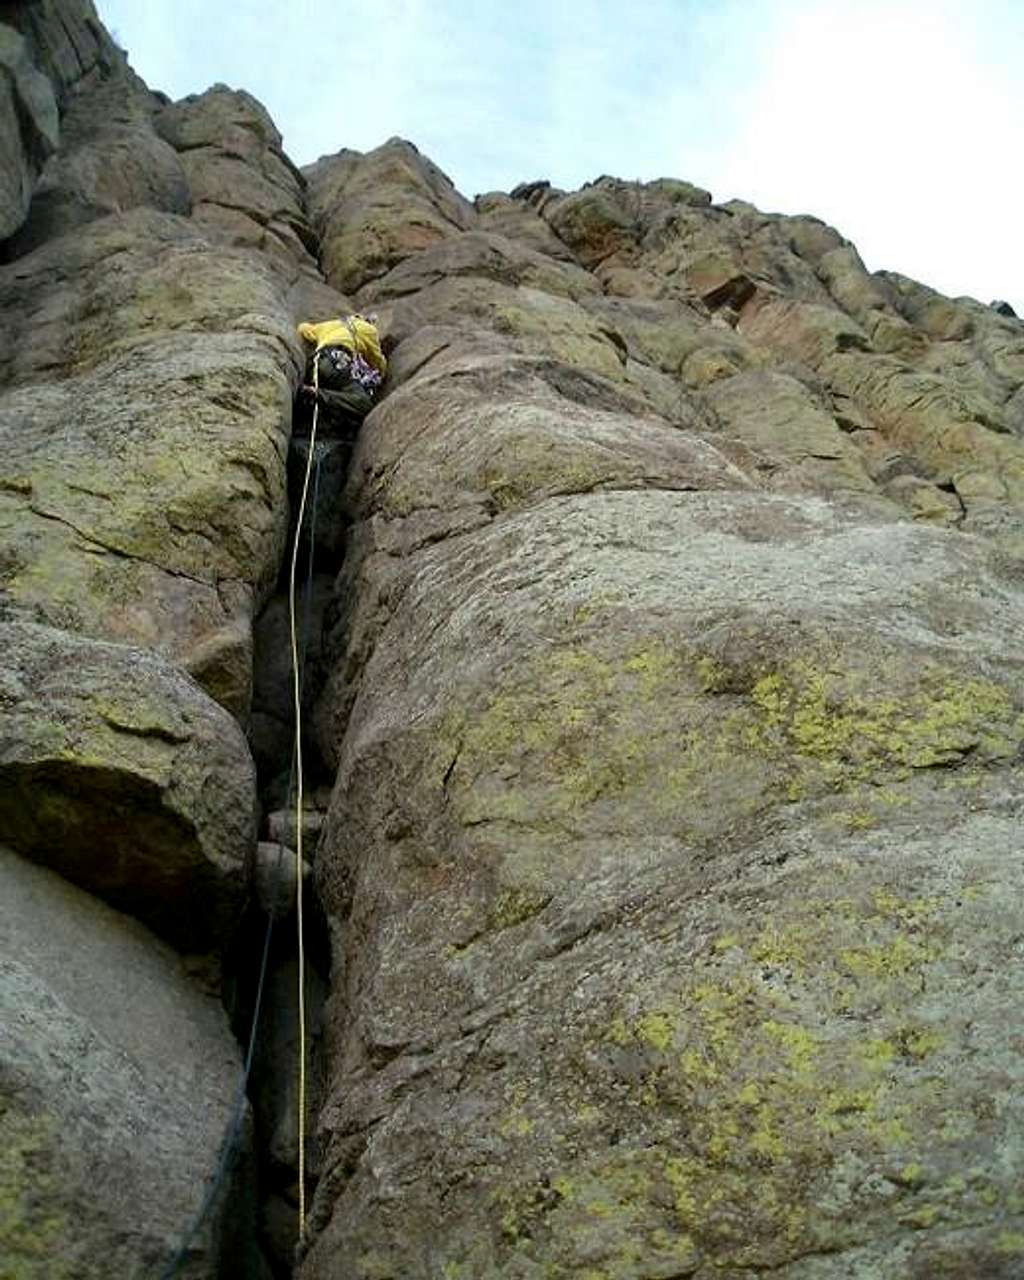 CHOCKSTONE CRACK. Todd Z. on the Durrance Route, Devils Tower, Wyoming.